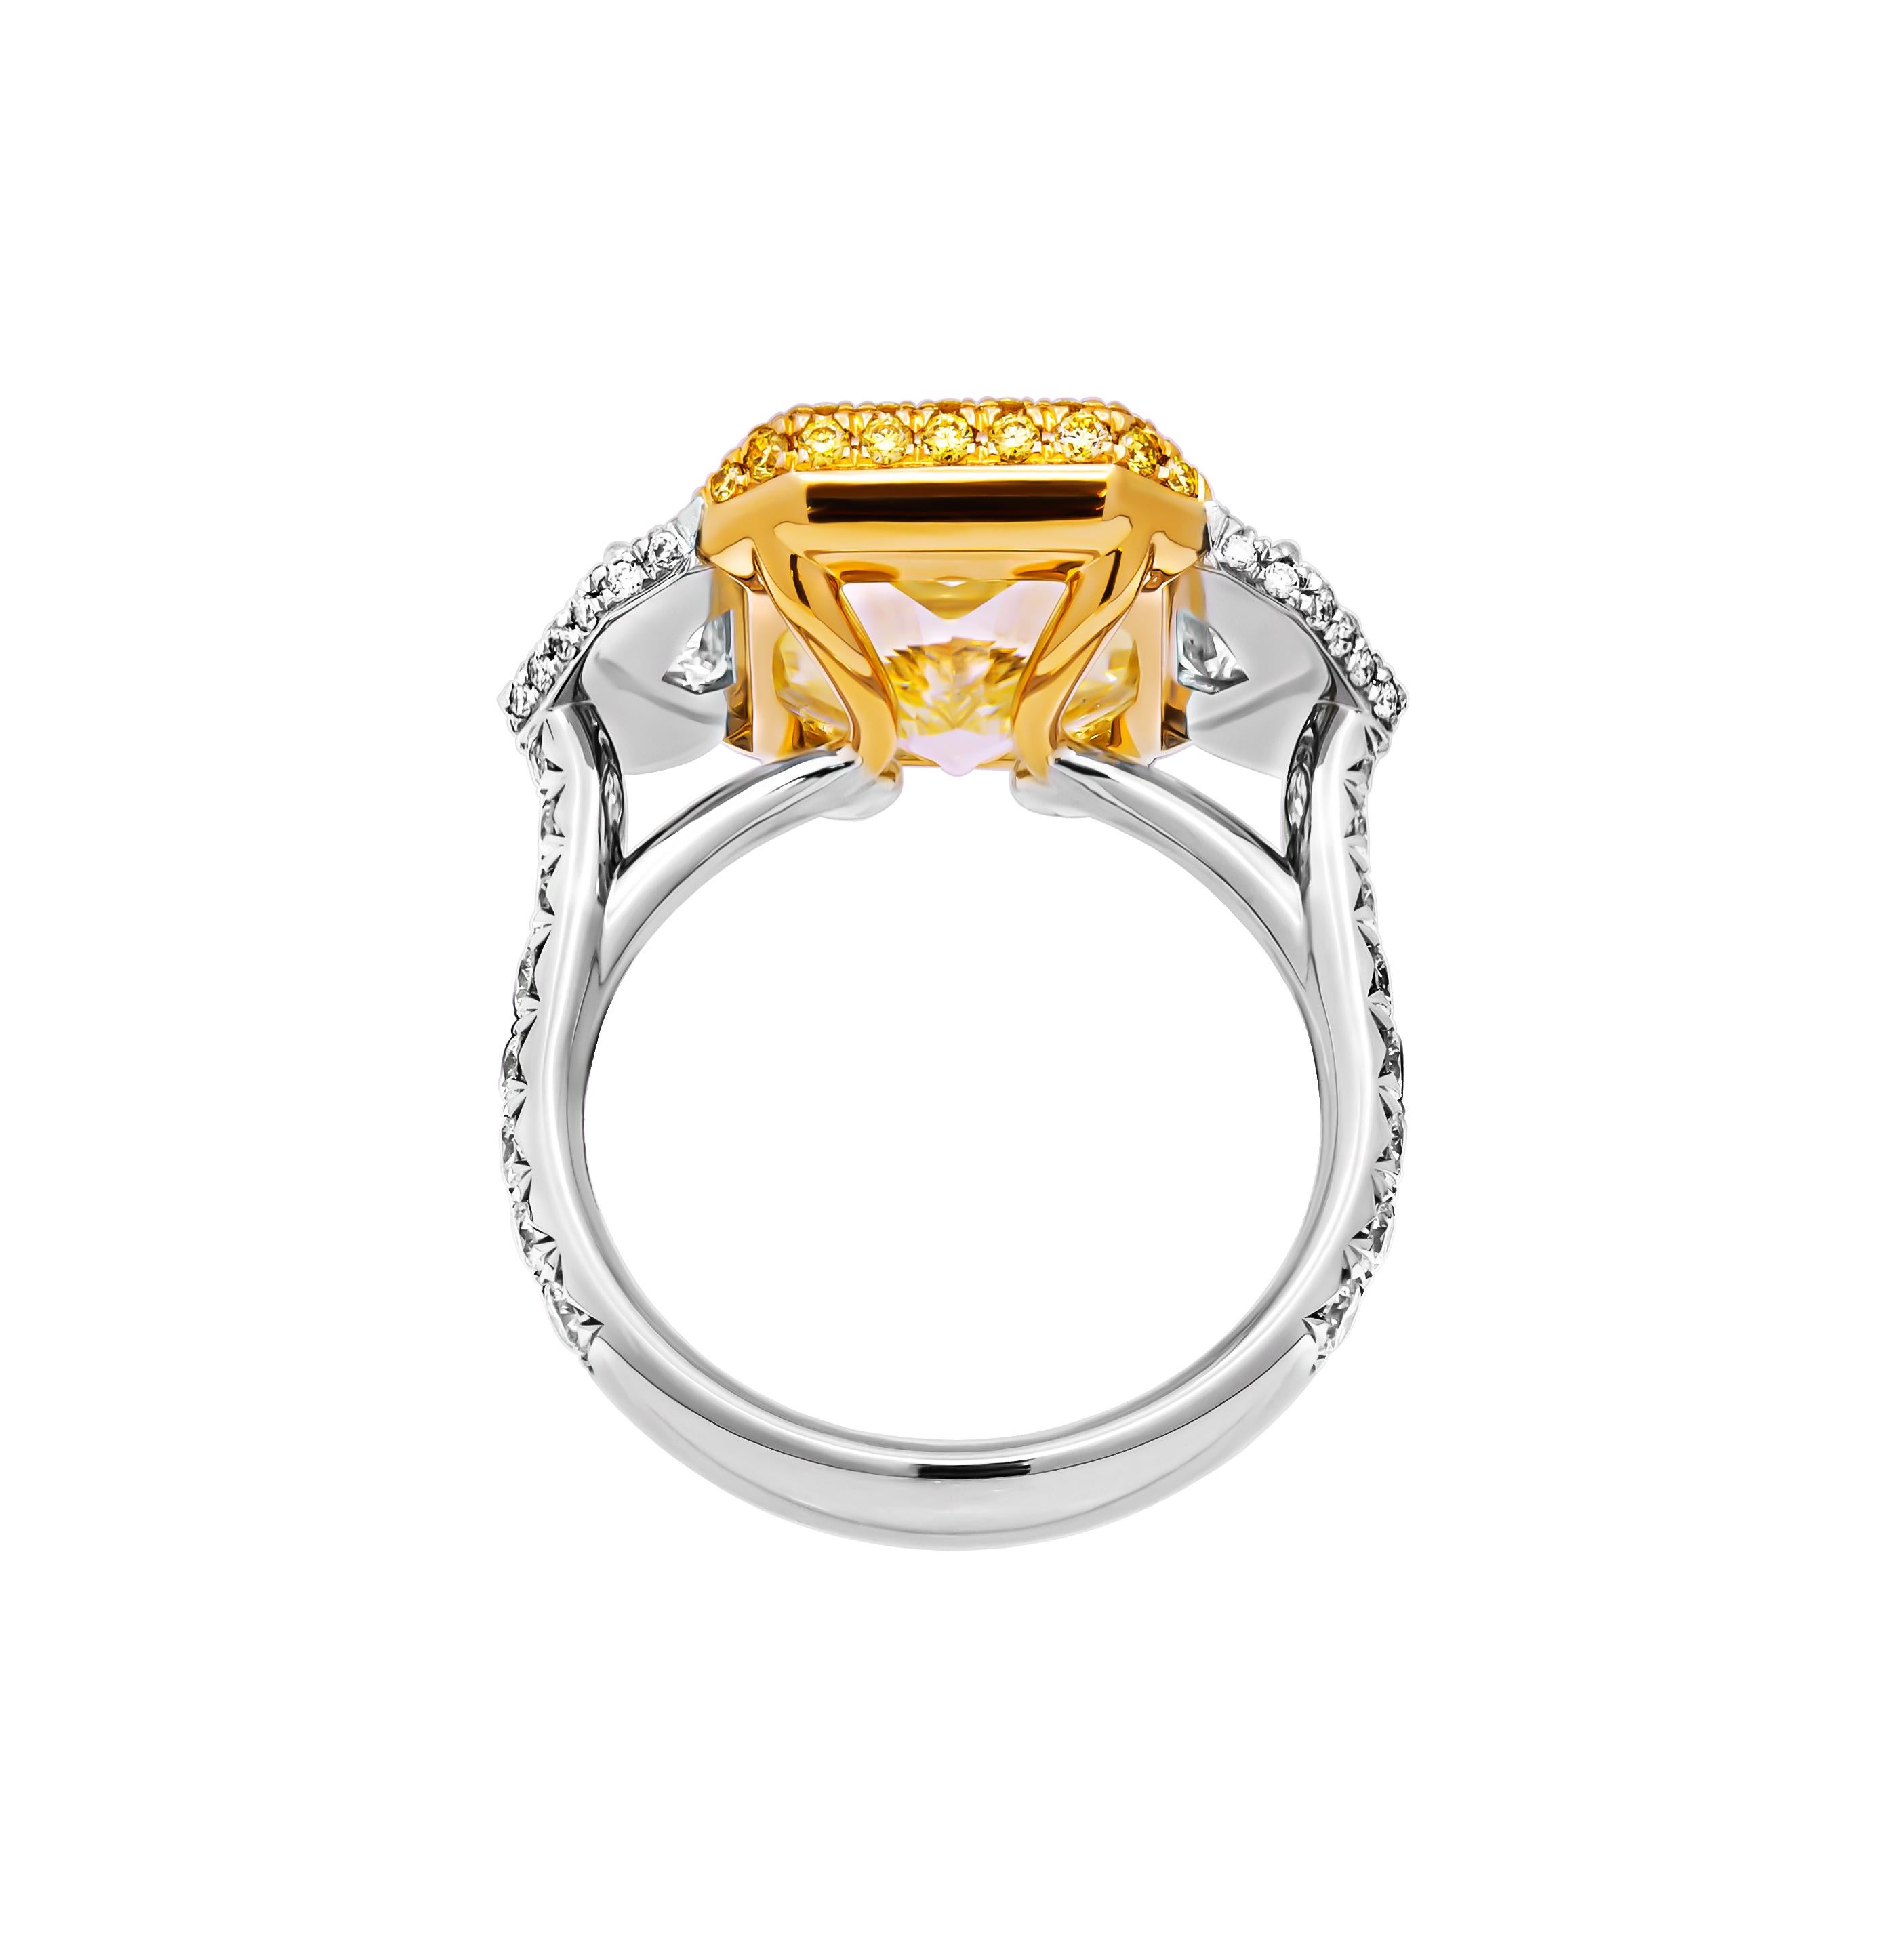 Modern GIA Certified 3 stone ring with 7.06ct Fancy Light Yellow Radiant Cut Diamond For Sale